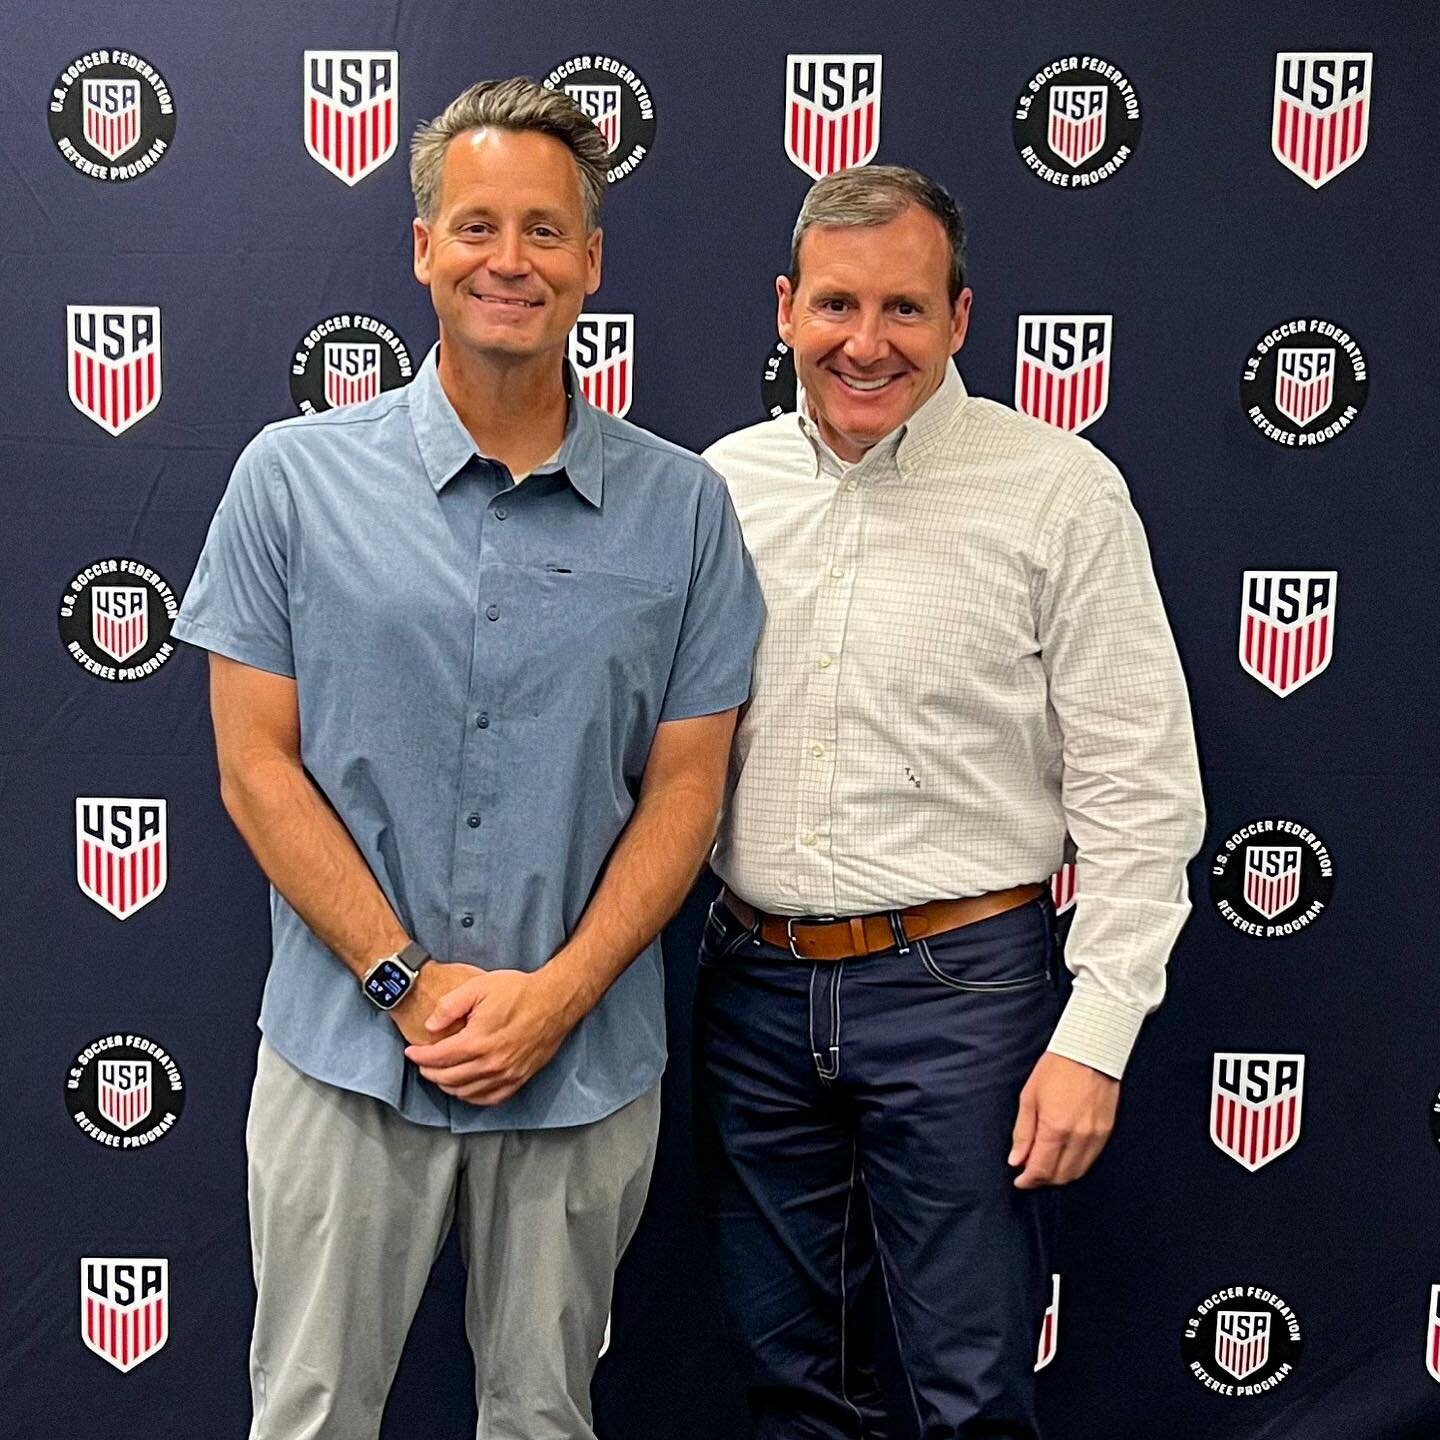 Joel Votaw (SYRA) and Todd Sergi (SRA) hard at work in US Soccers office today finding ways and learning how to improve the referee experiences in our state!